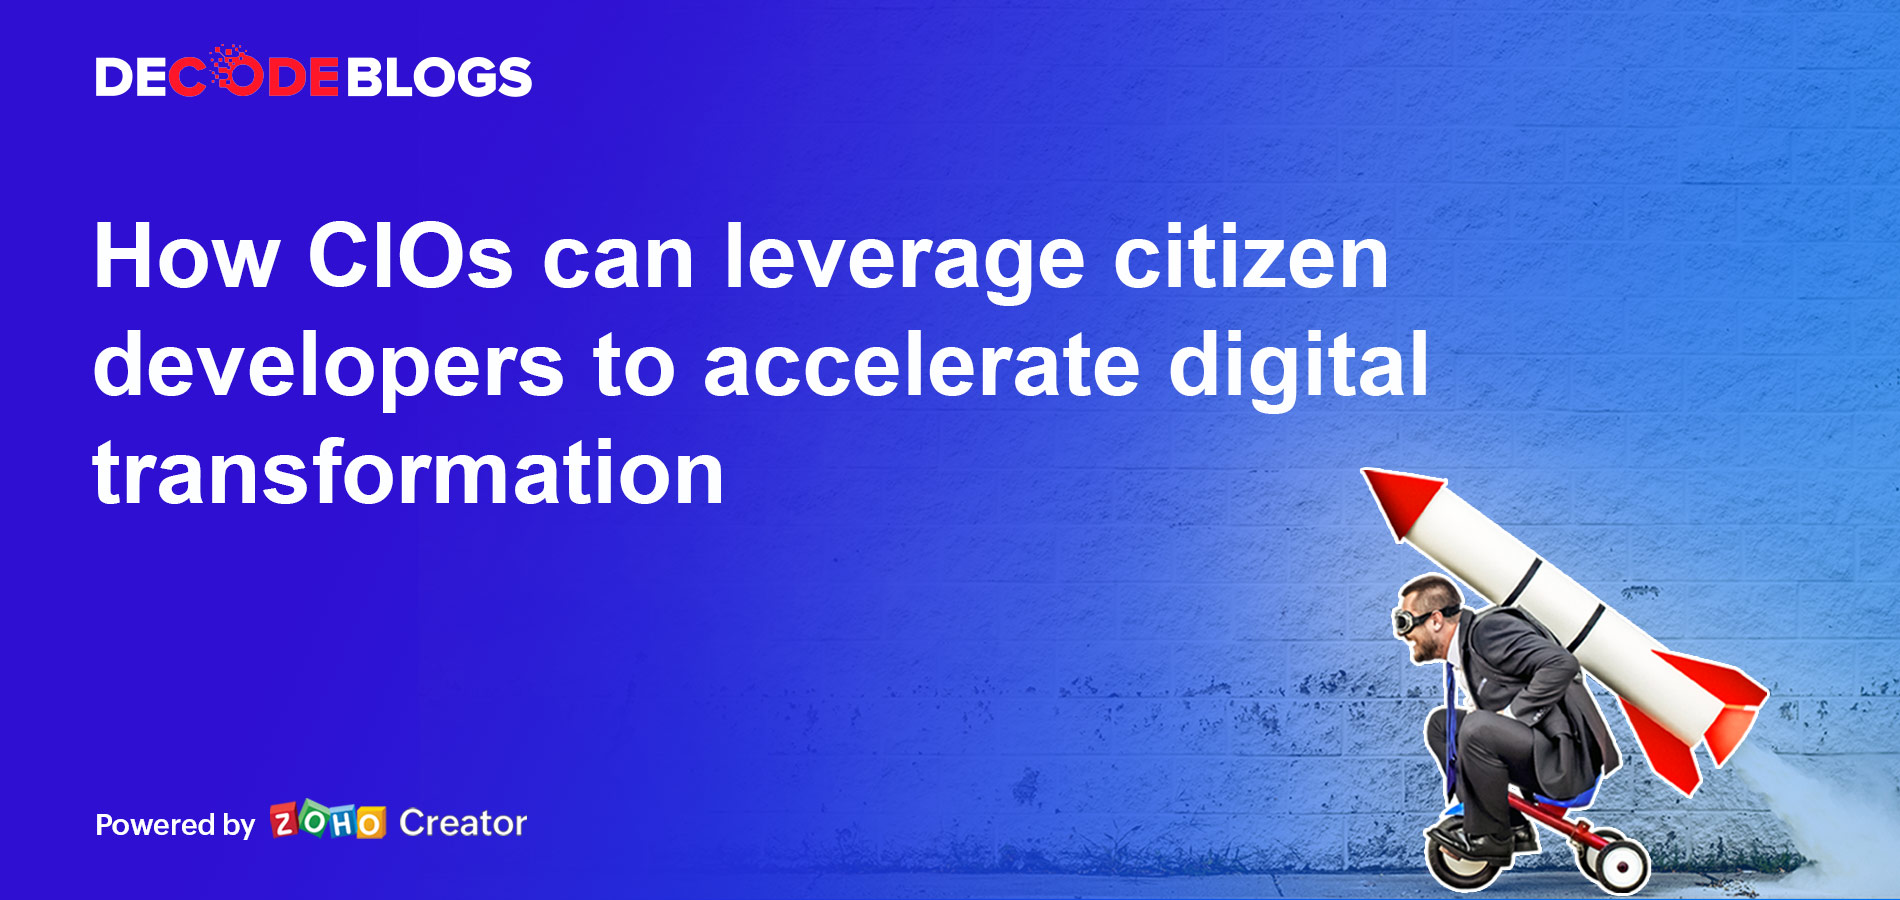 How CIOs can leverage citizen developers to accelerate application development